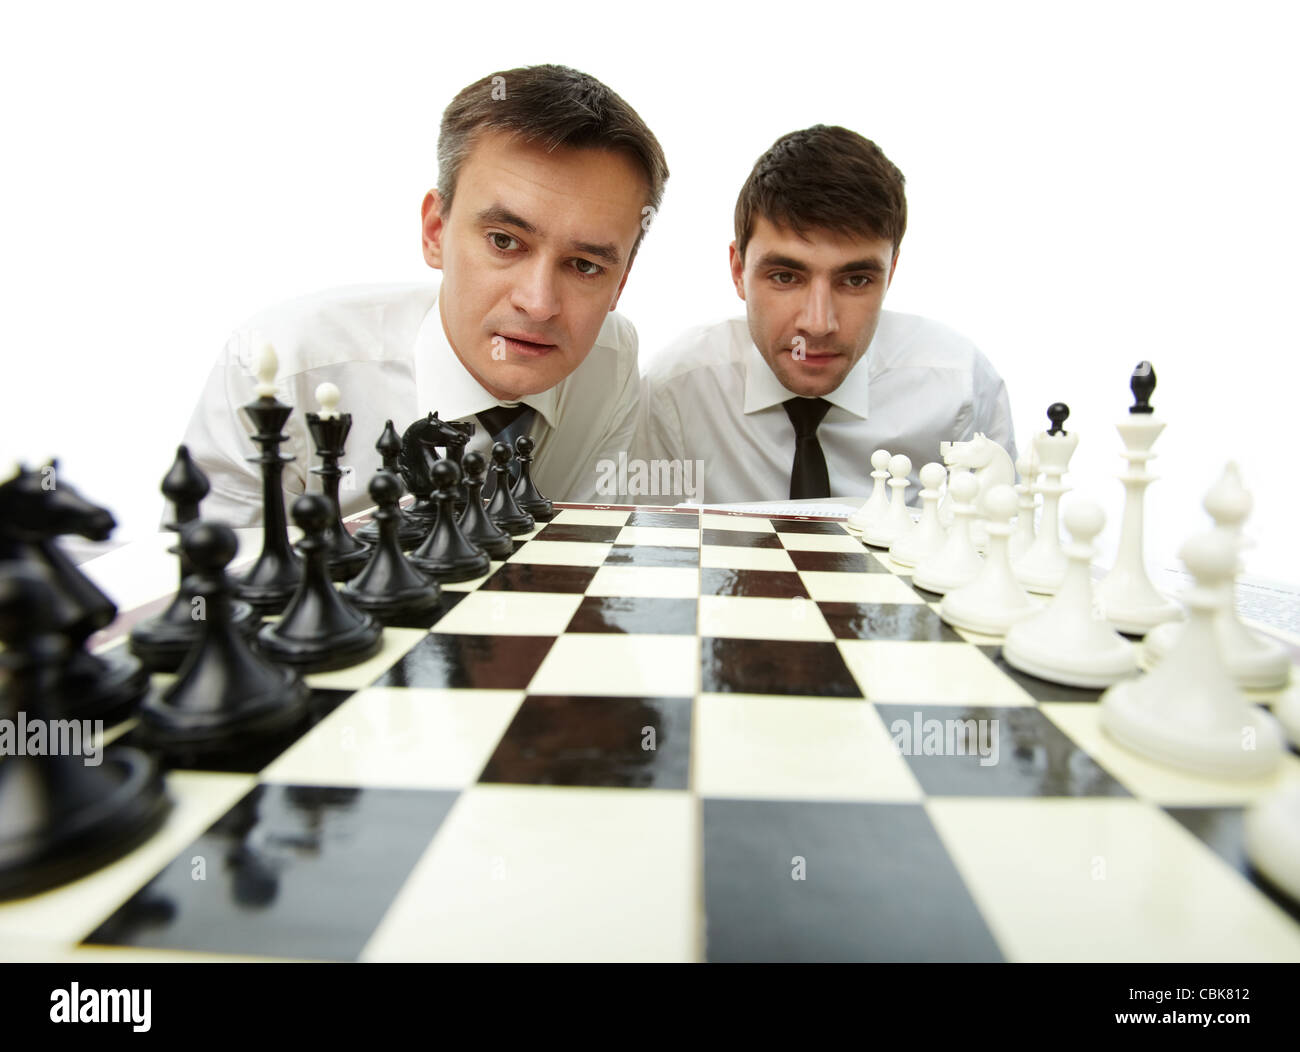 Two men looking at chess figures on chess board Stock Photo